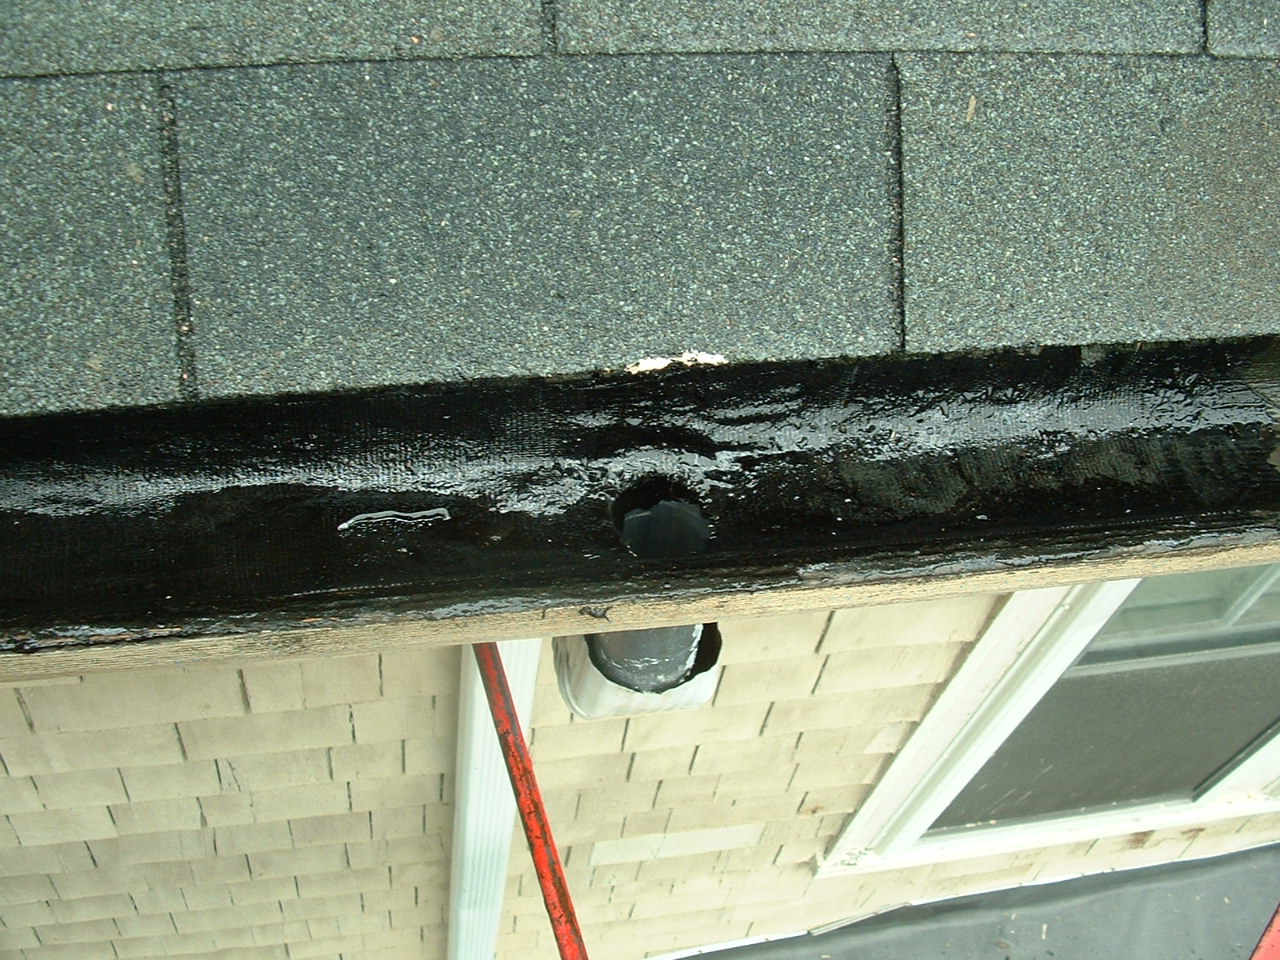 Wooden gutter Repair - The East Side: One section, 36 